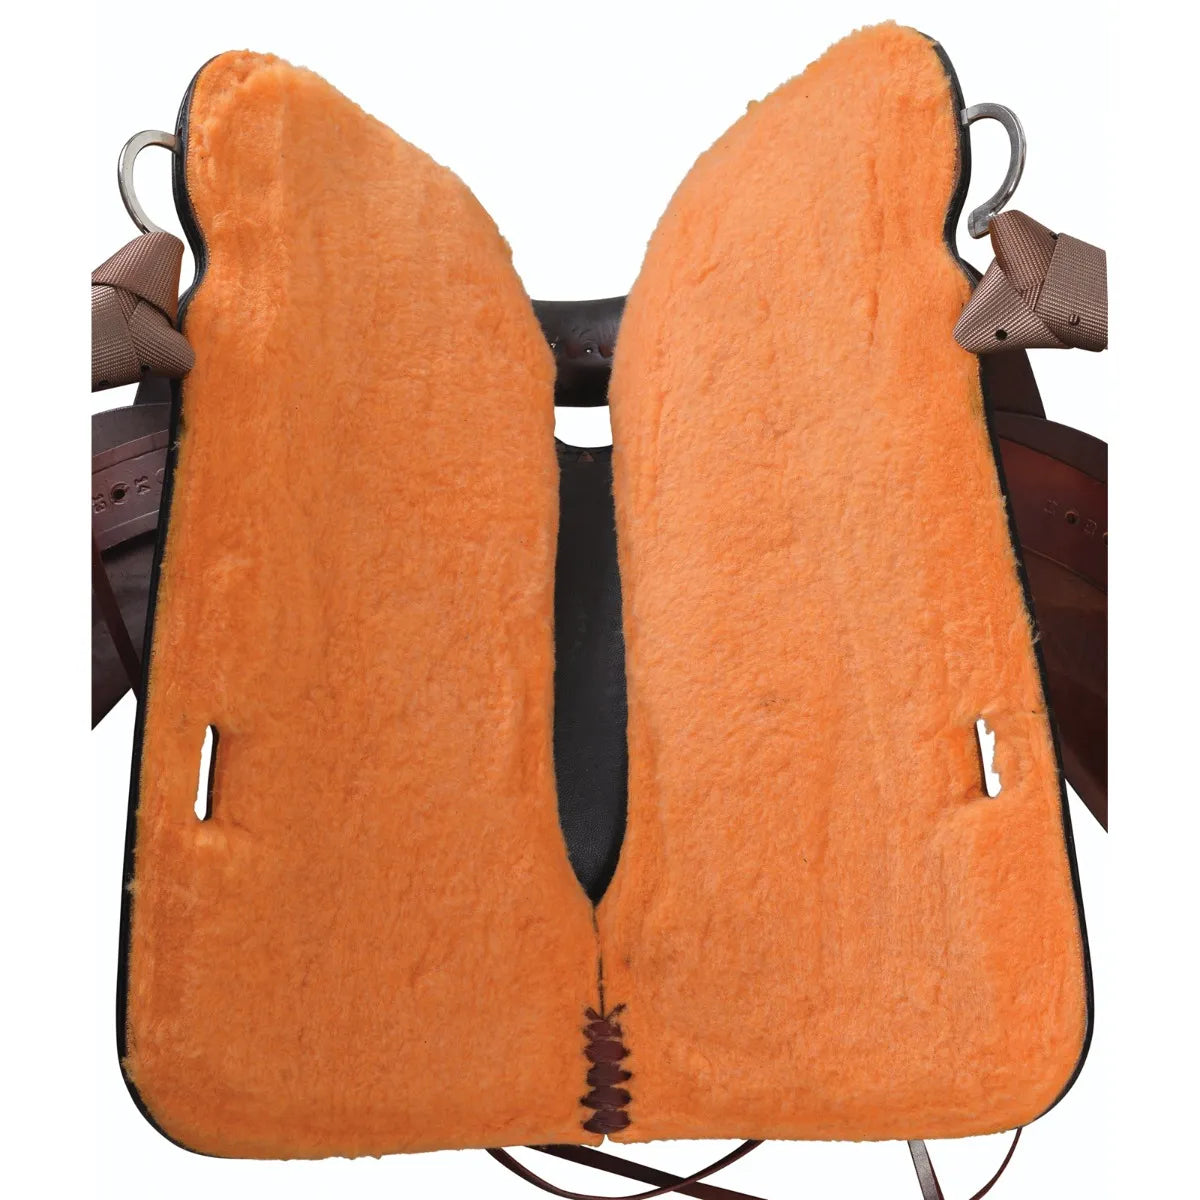 Circle Y 6812 Mineral Wells Trail Saddle, 17"